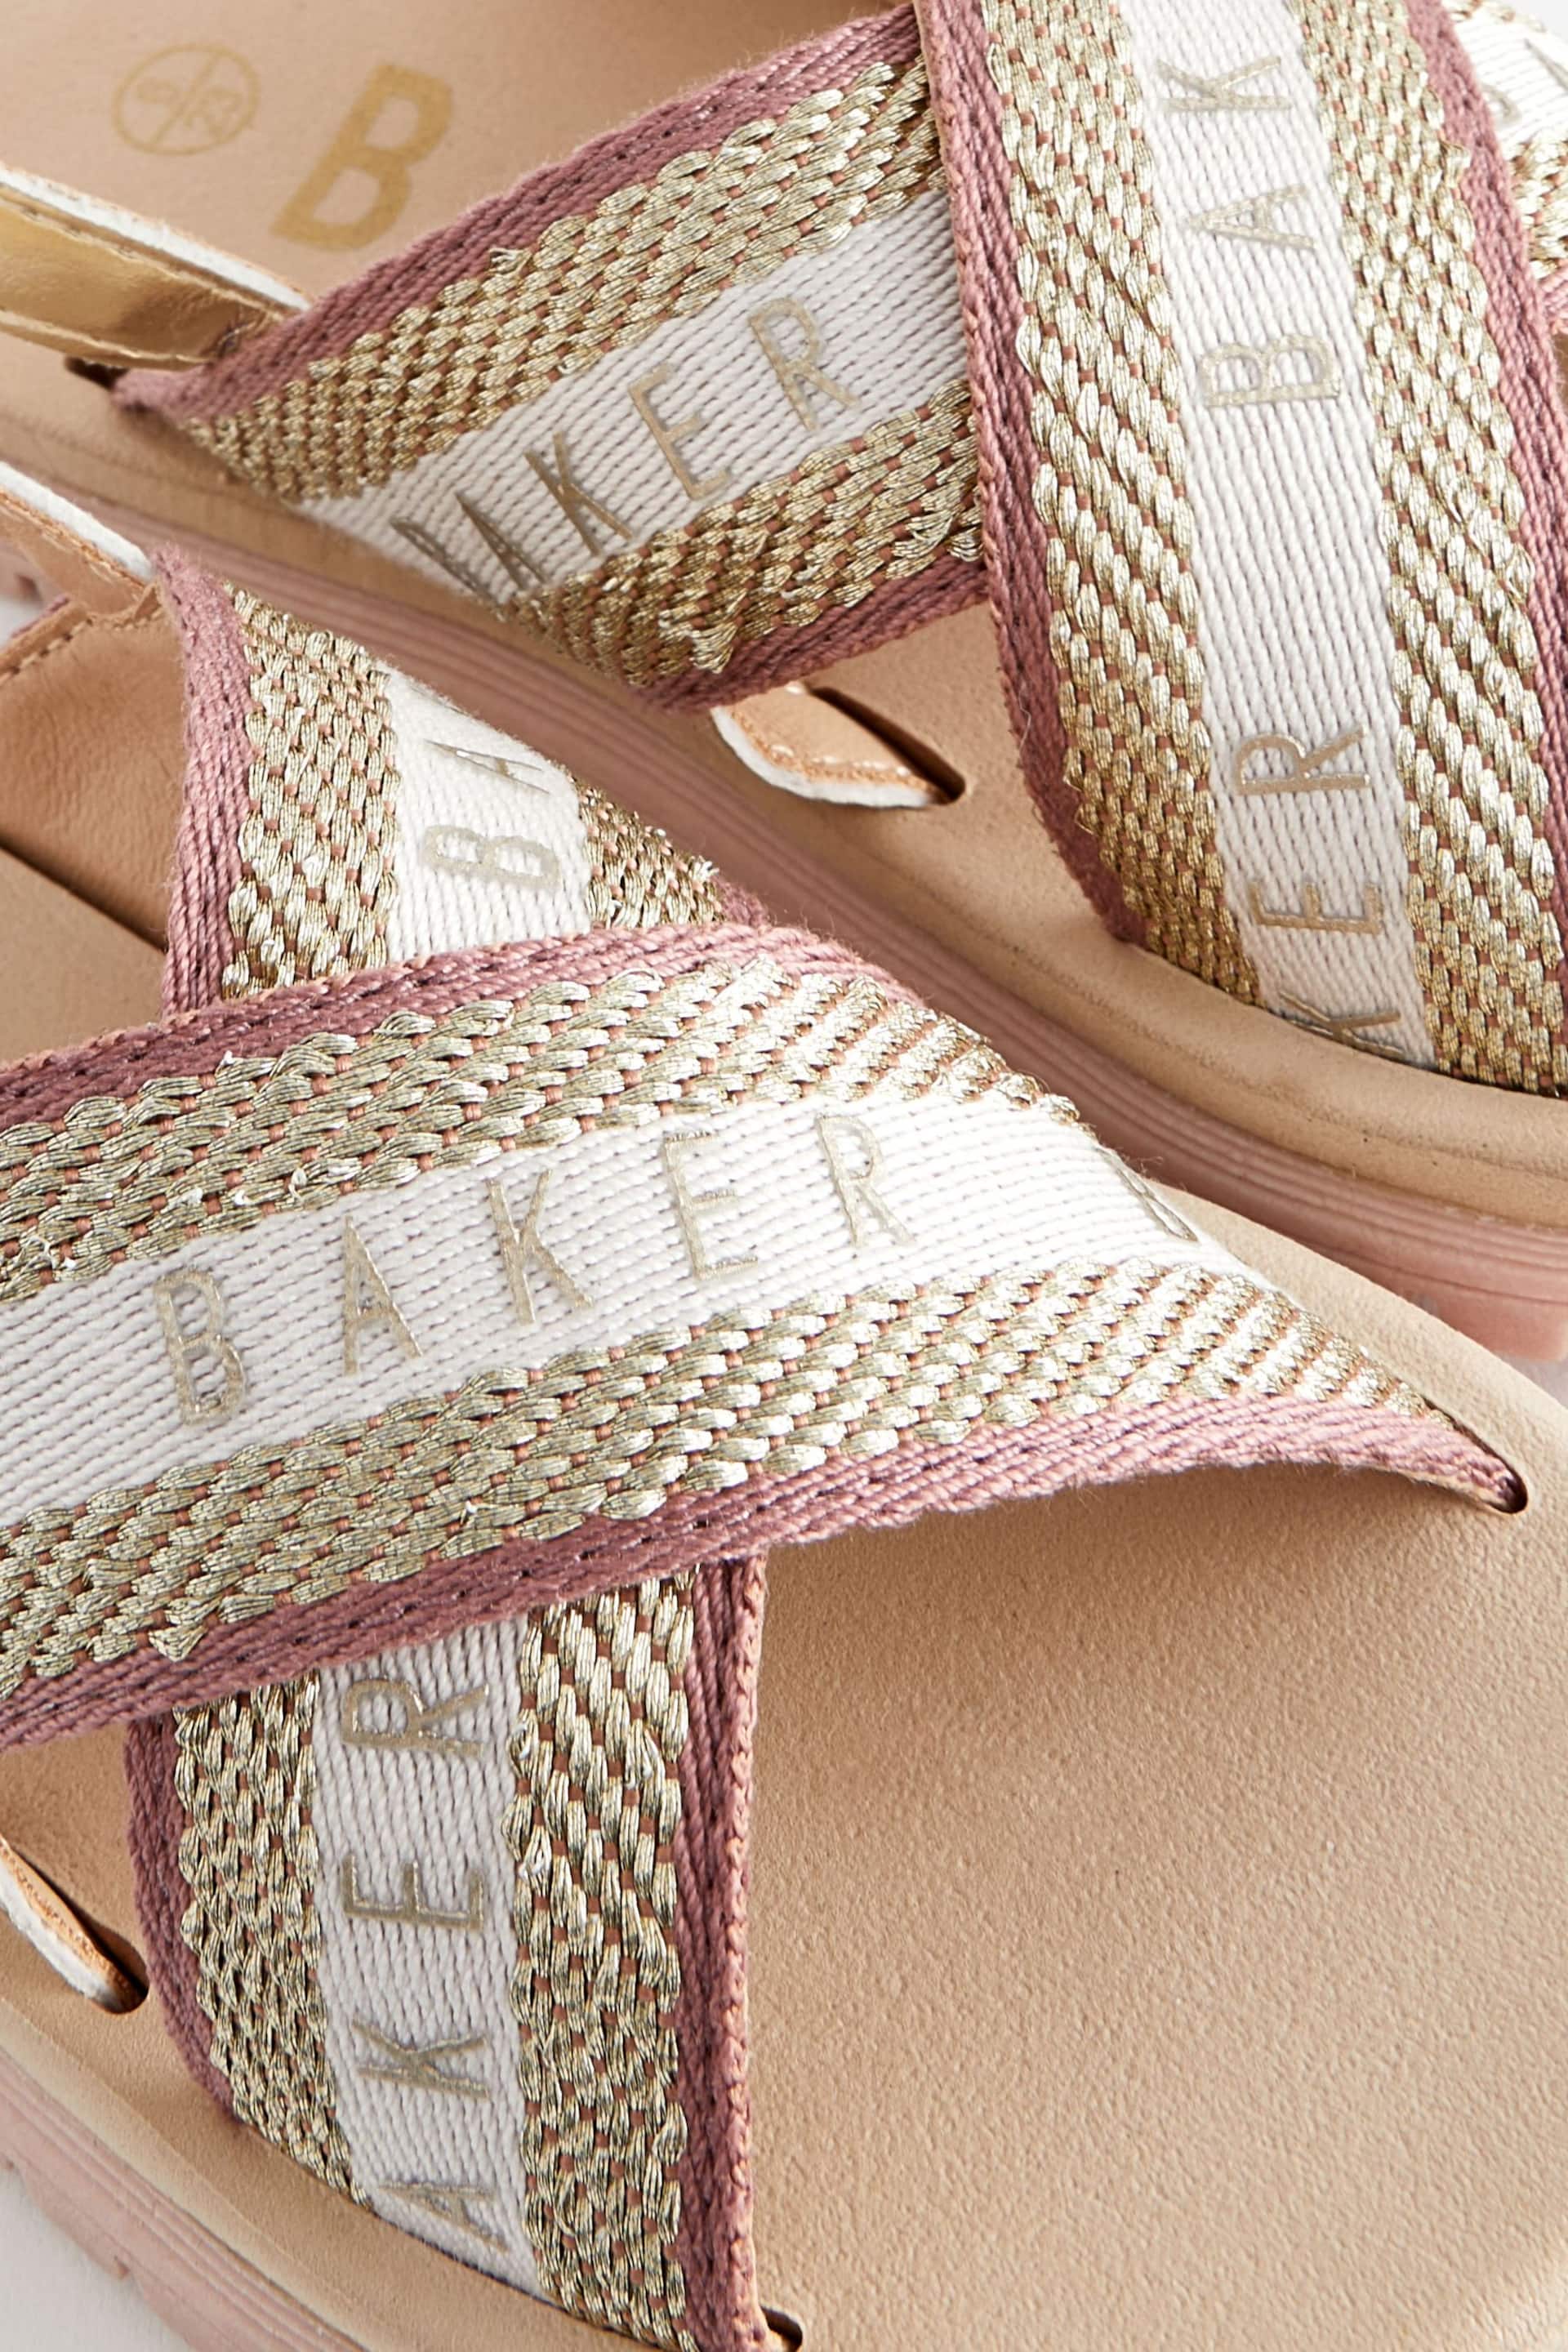 Baker by Ted Baker Girls Woven and Metallic Wedge Sandals - Image 6 of 6